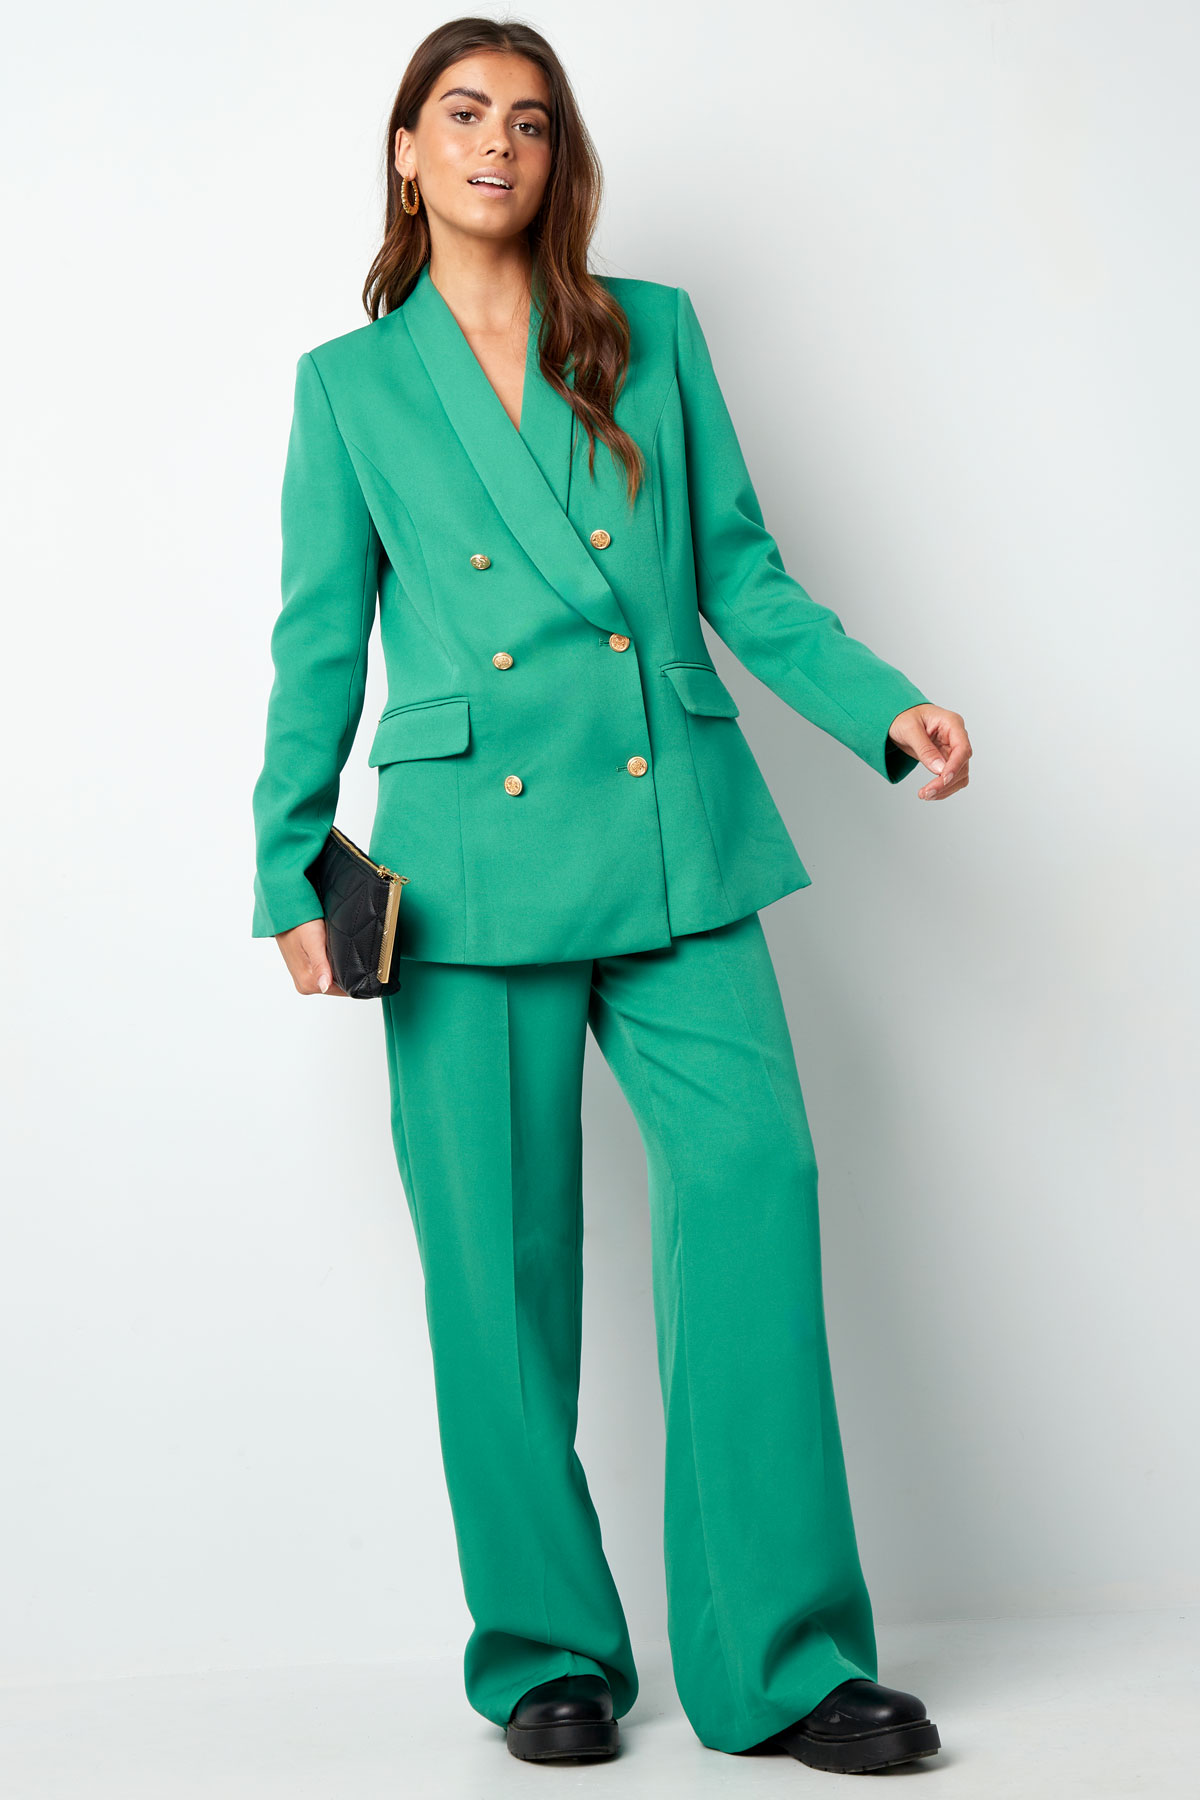 Oversized blazer gold buttons - green h5 Picture7